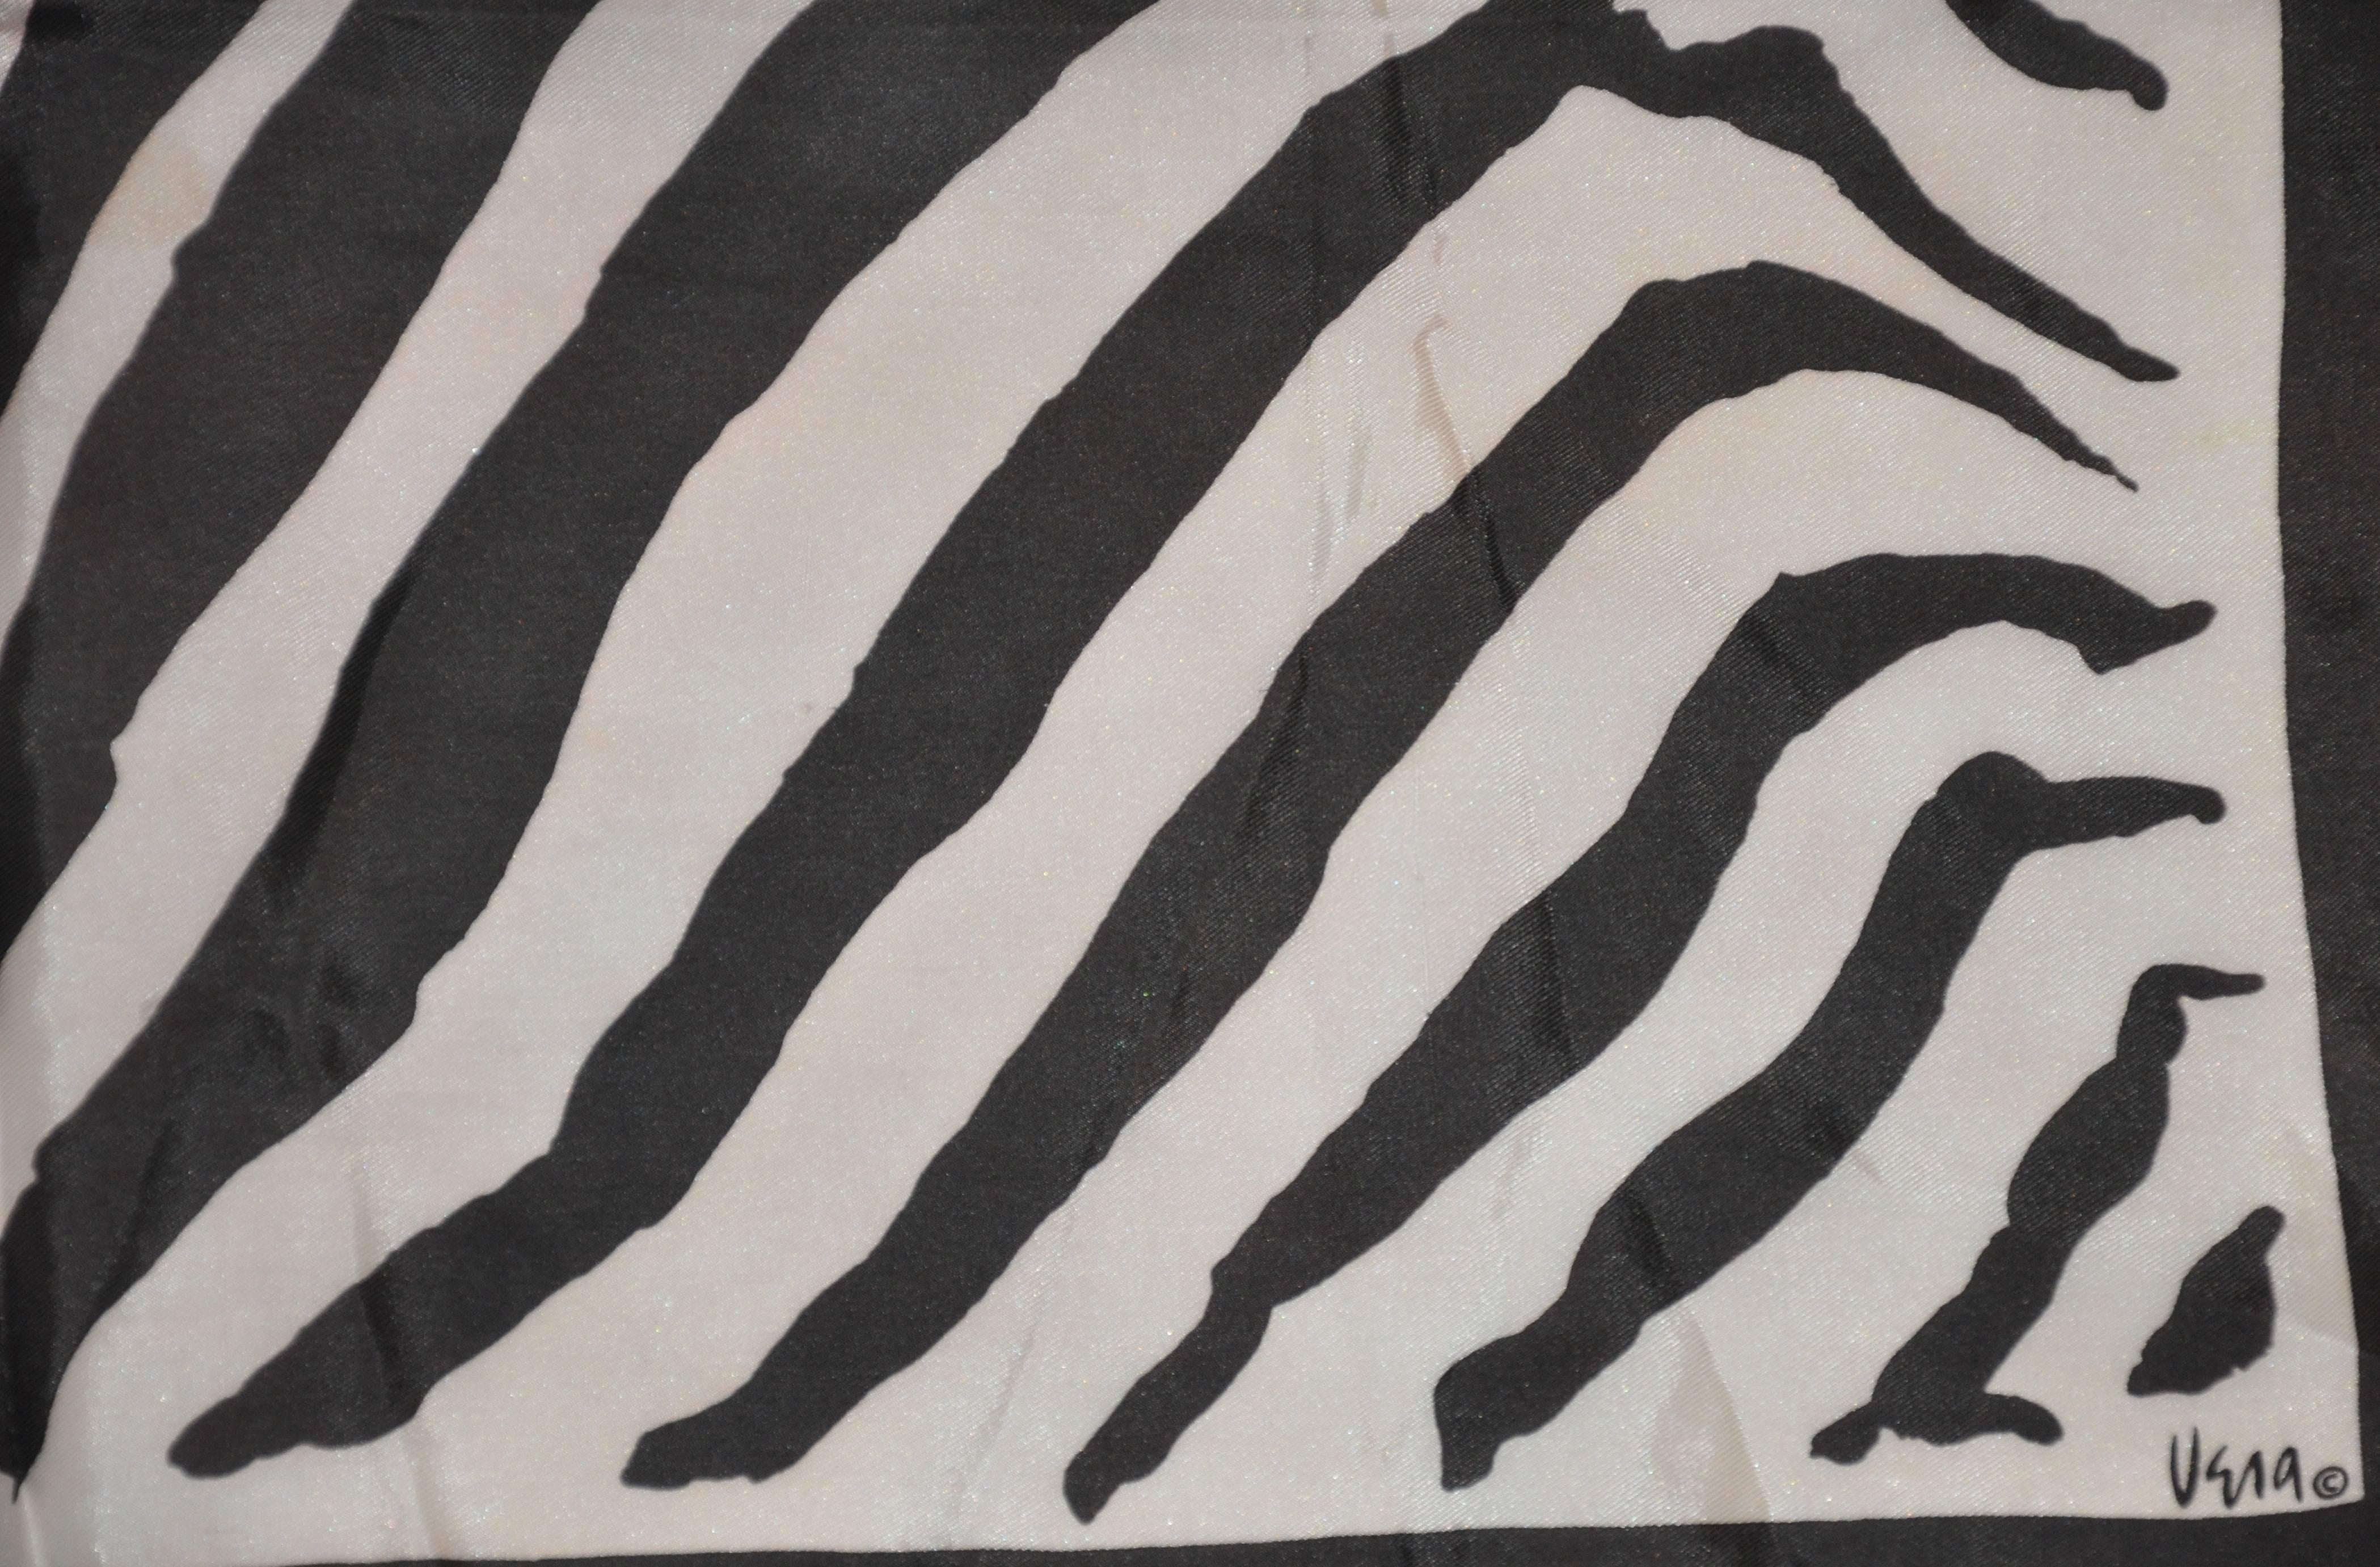 Vera fawn and black zebra stripe silk scarf measures 24" x 24" and finished with rolled edges. Made in Japan.